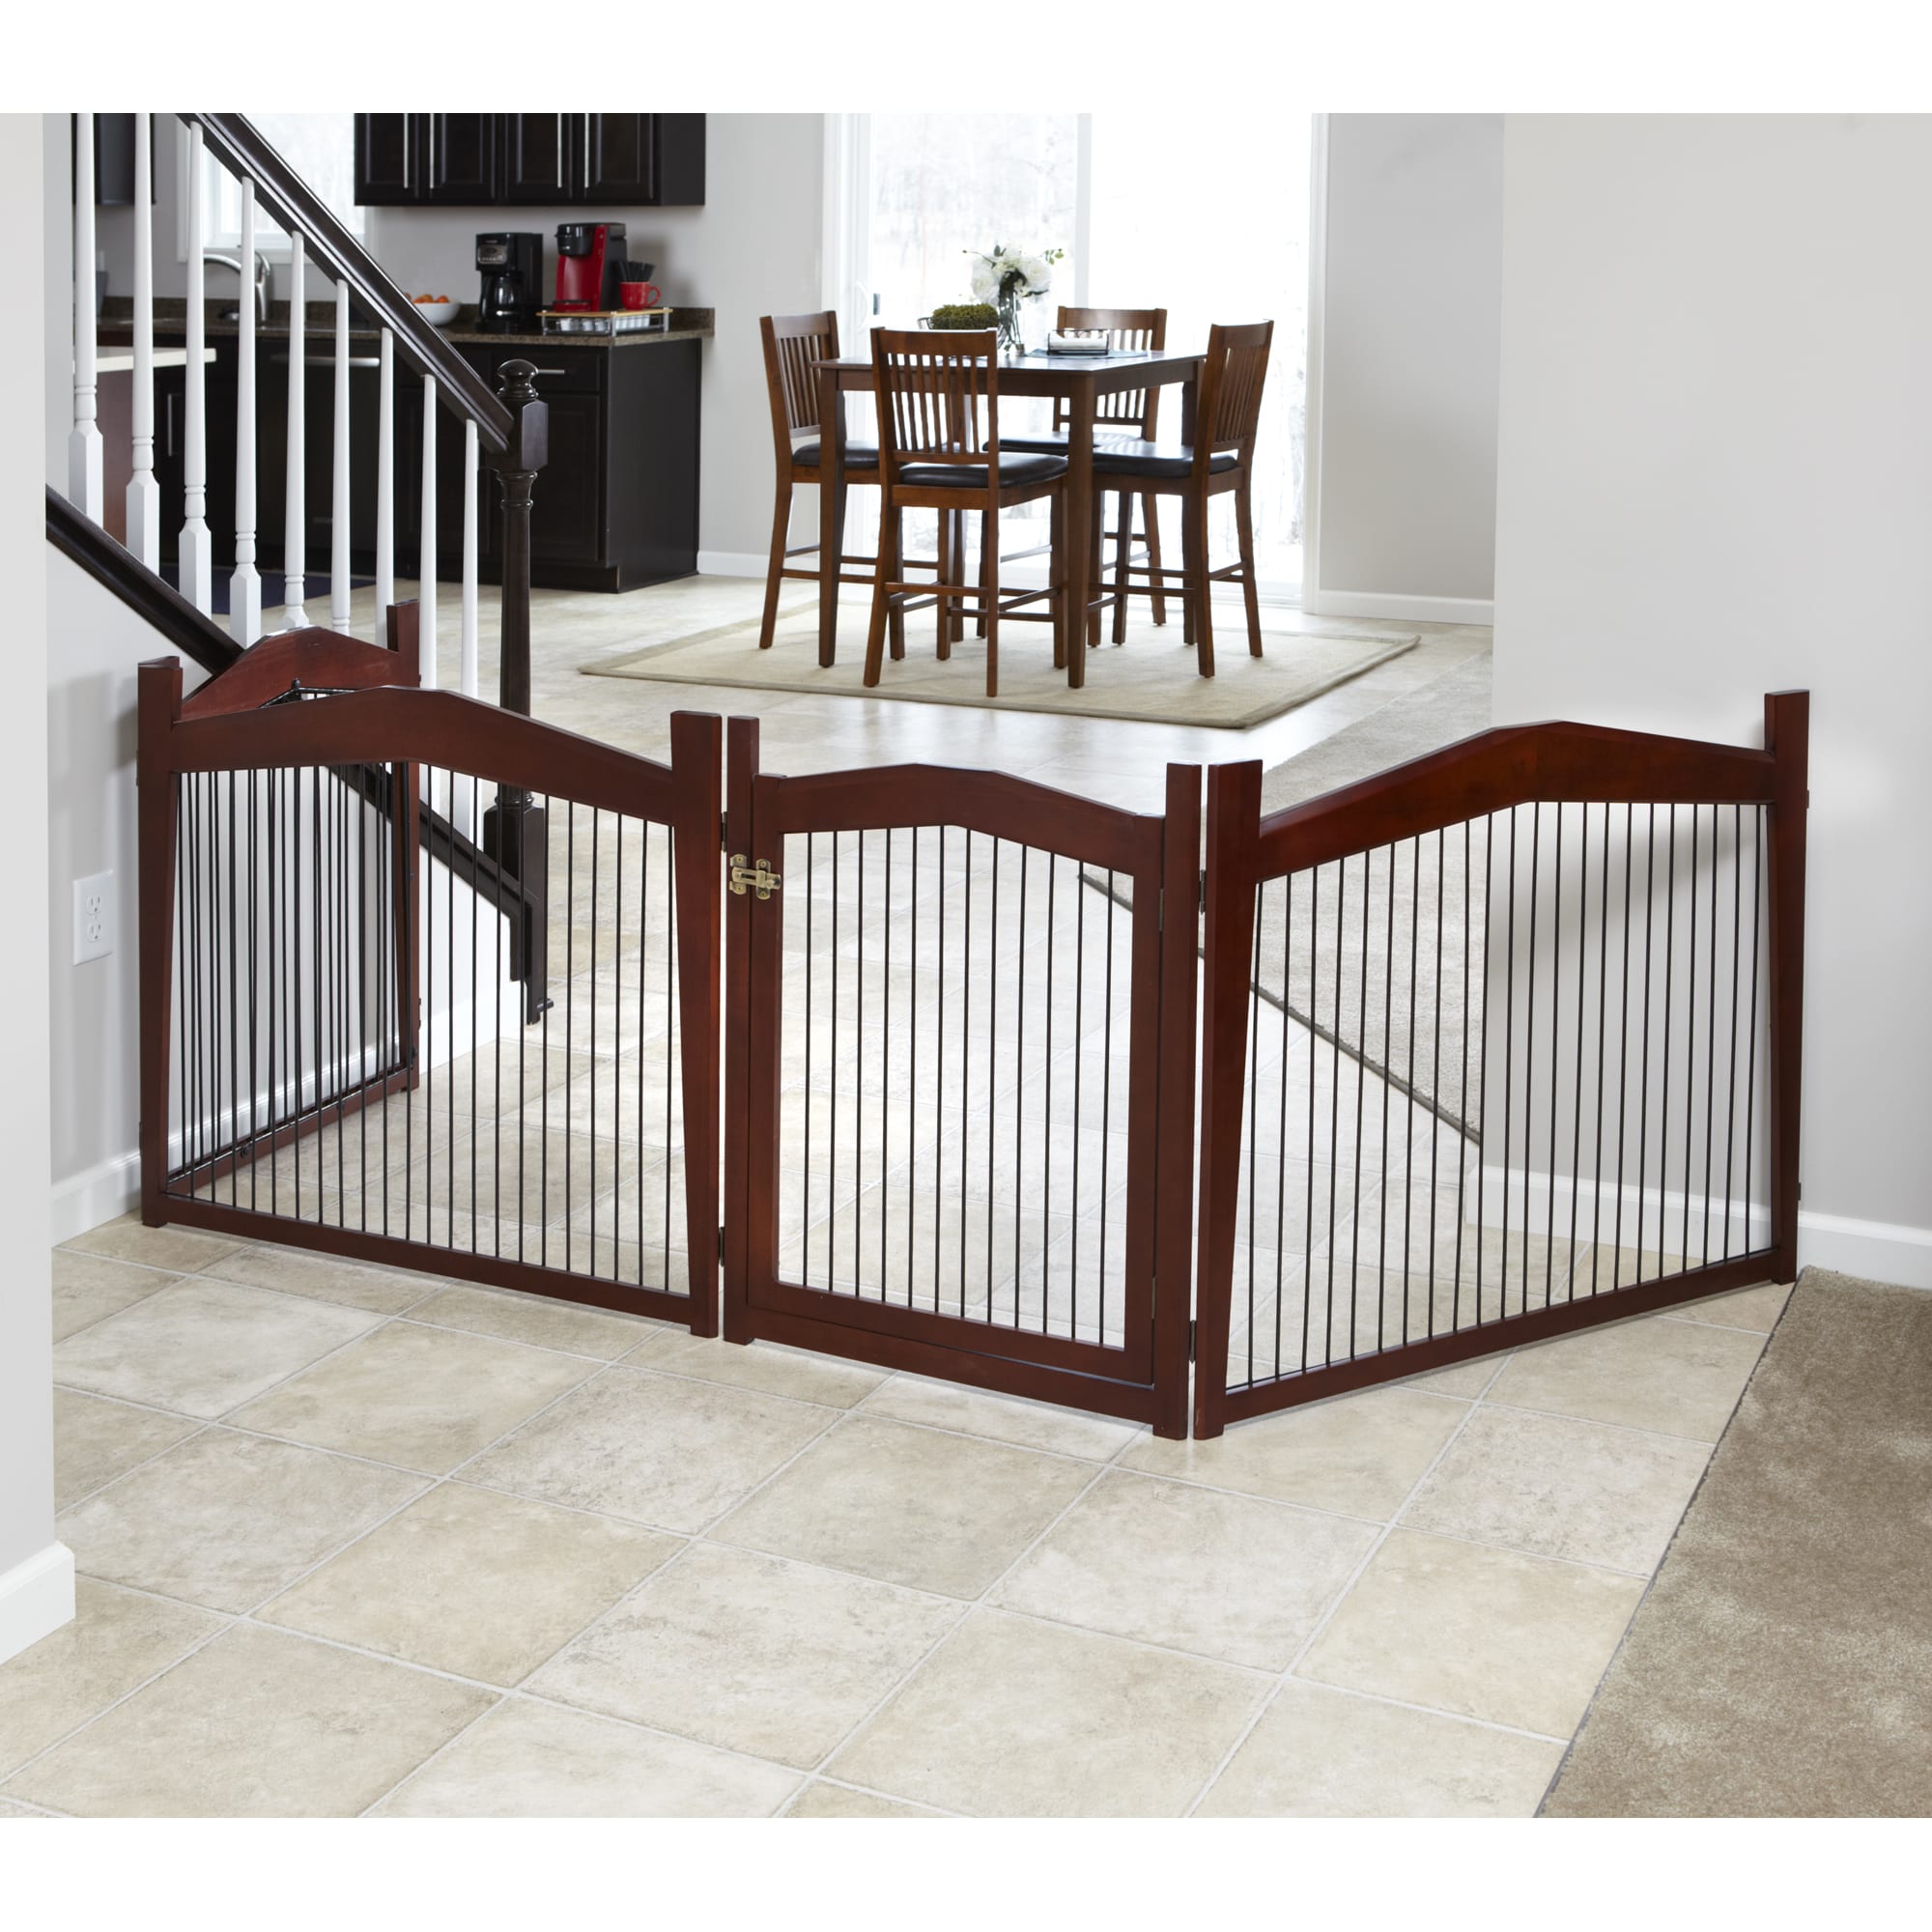 Photos - Dog Kennel Merry Products Merry Products 2-in-1 Configurable Pet Crate and Gate, 40"